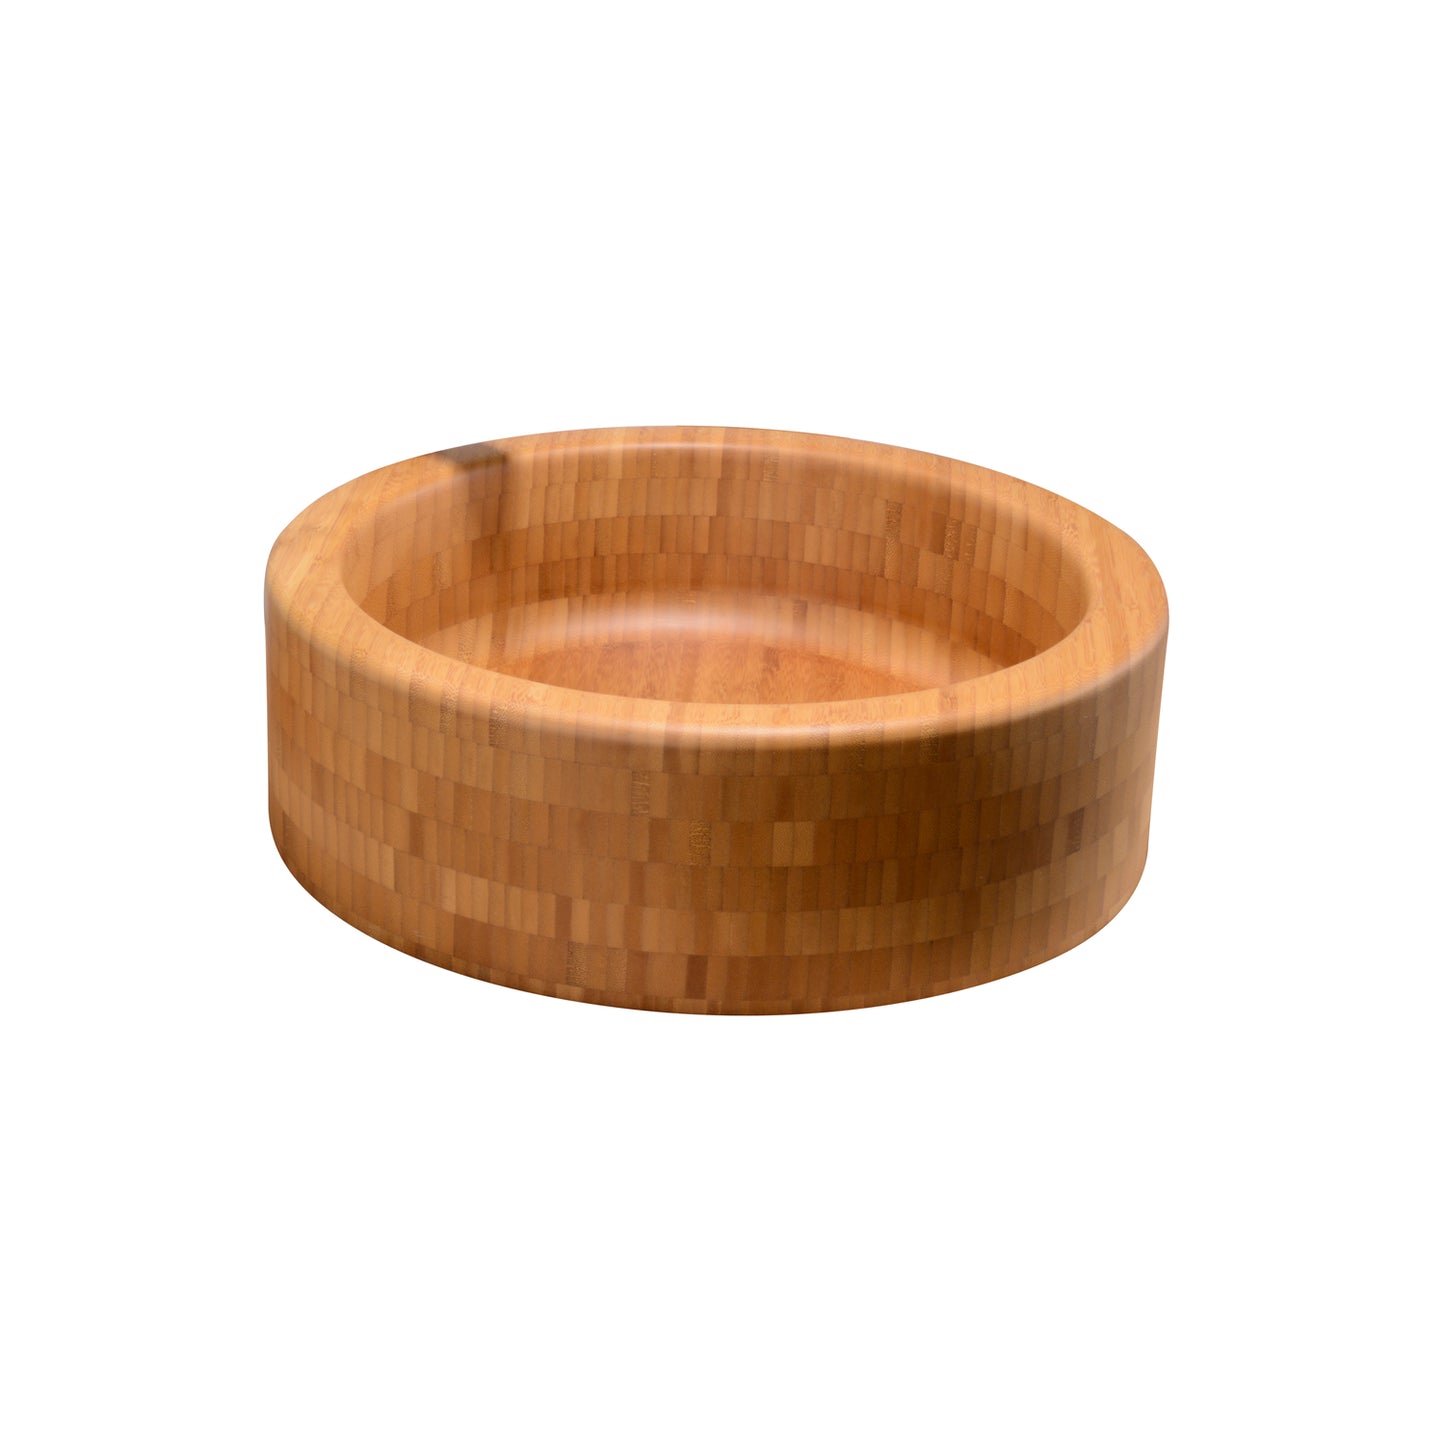 Samos 16-1/2" Round Bamboo Vessel Sink with Natural Finish